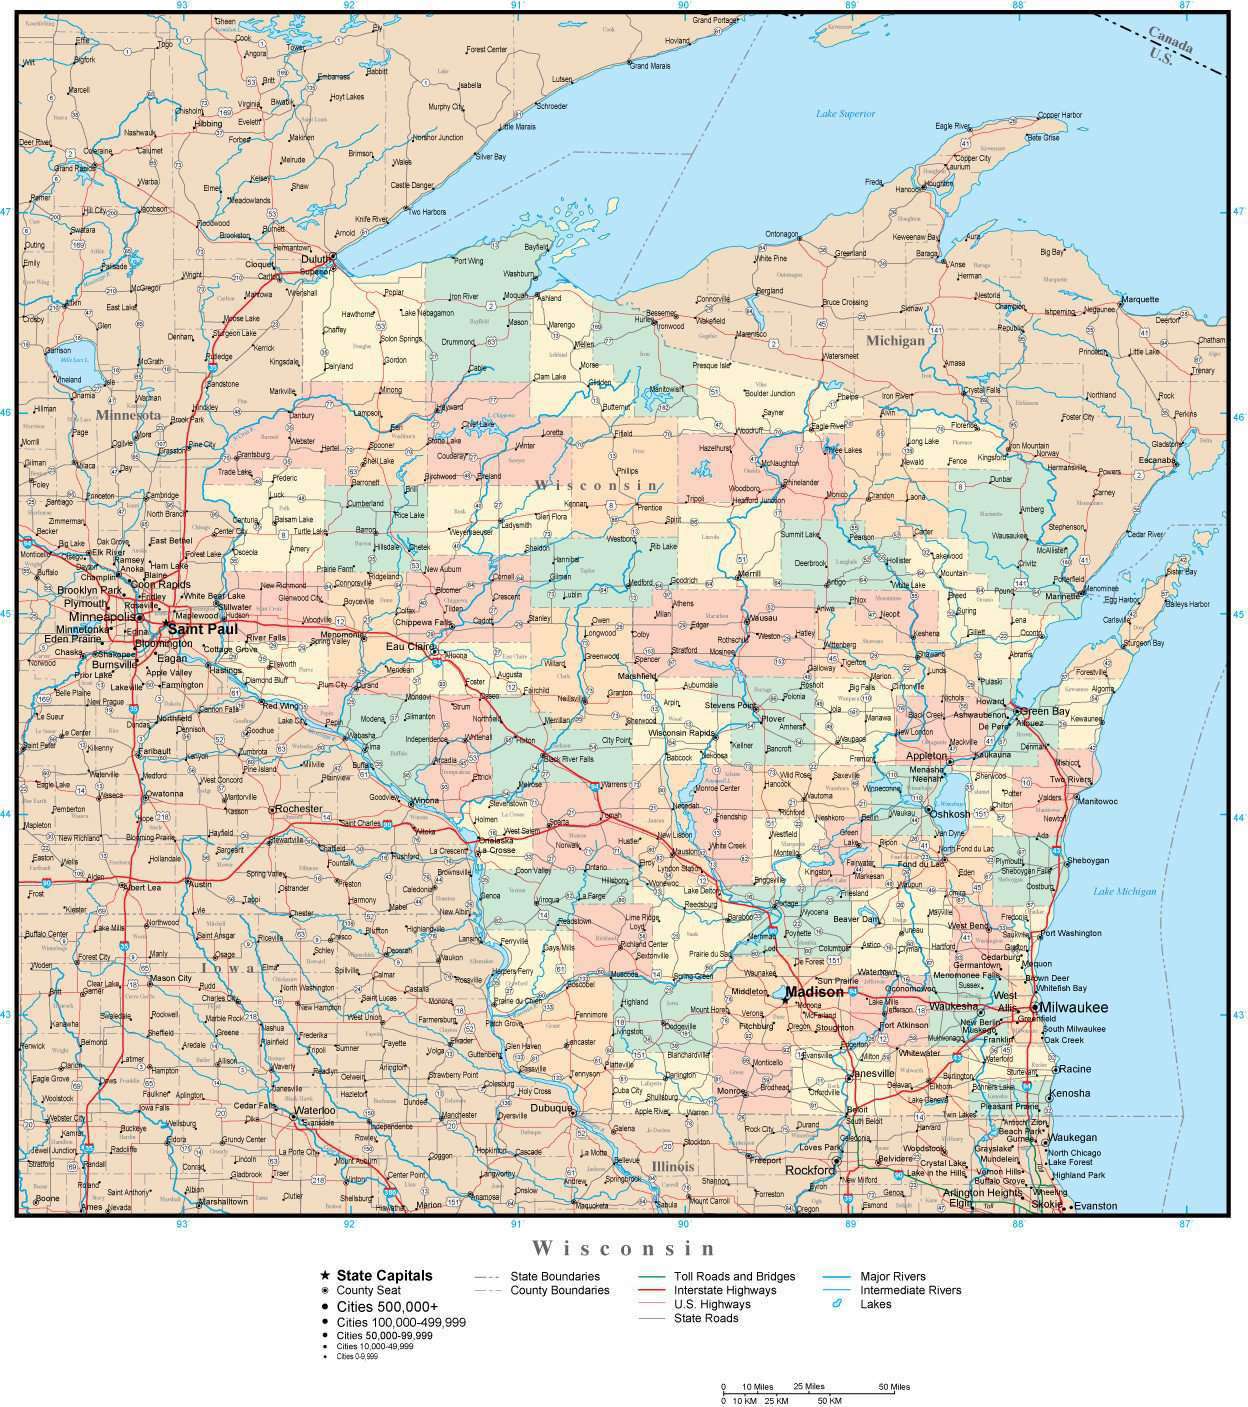 Wisconsin Adobe Illustrator Map with Counties, Cities, County Seats